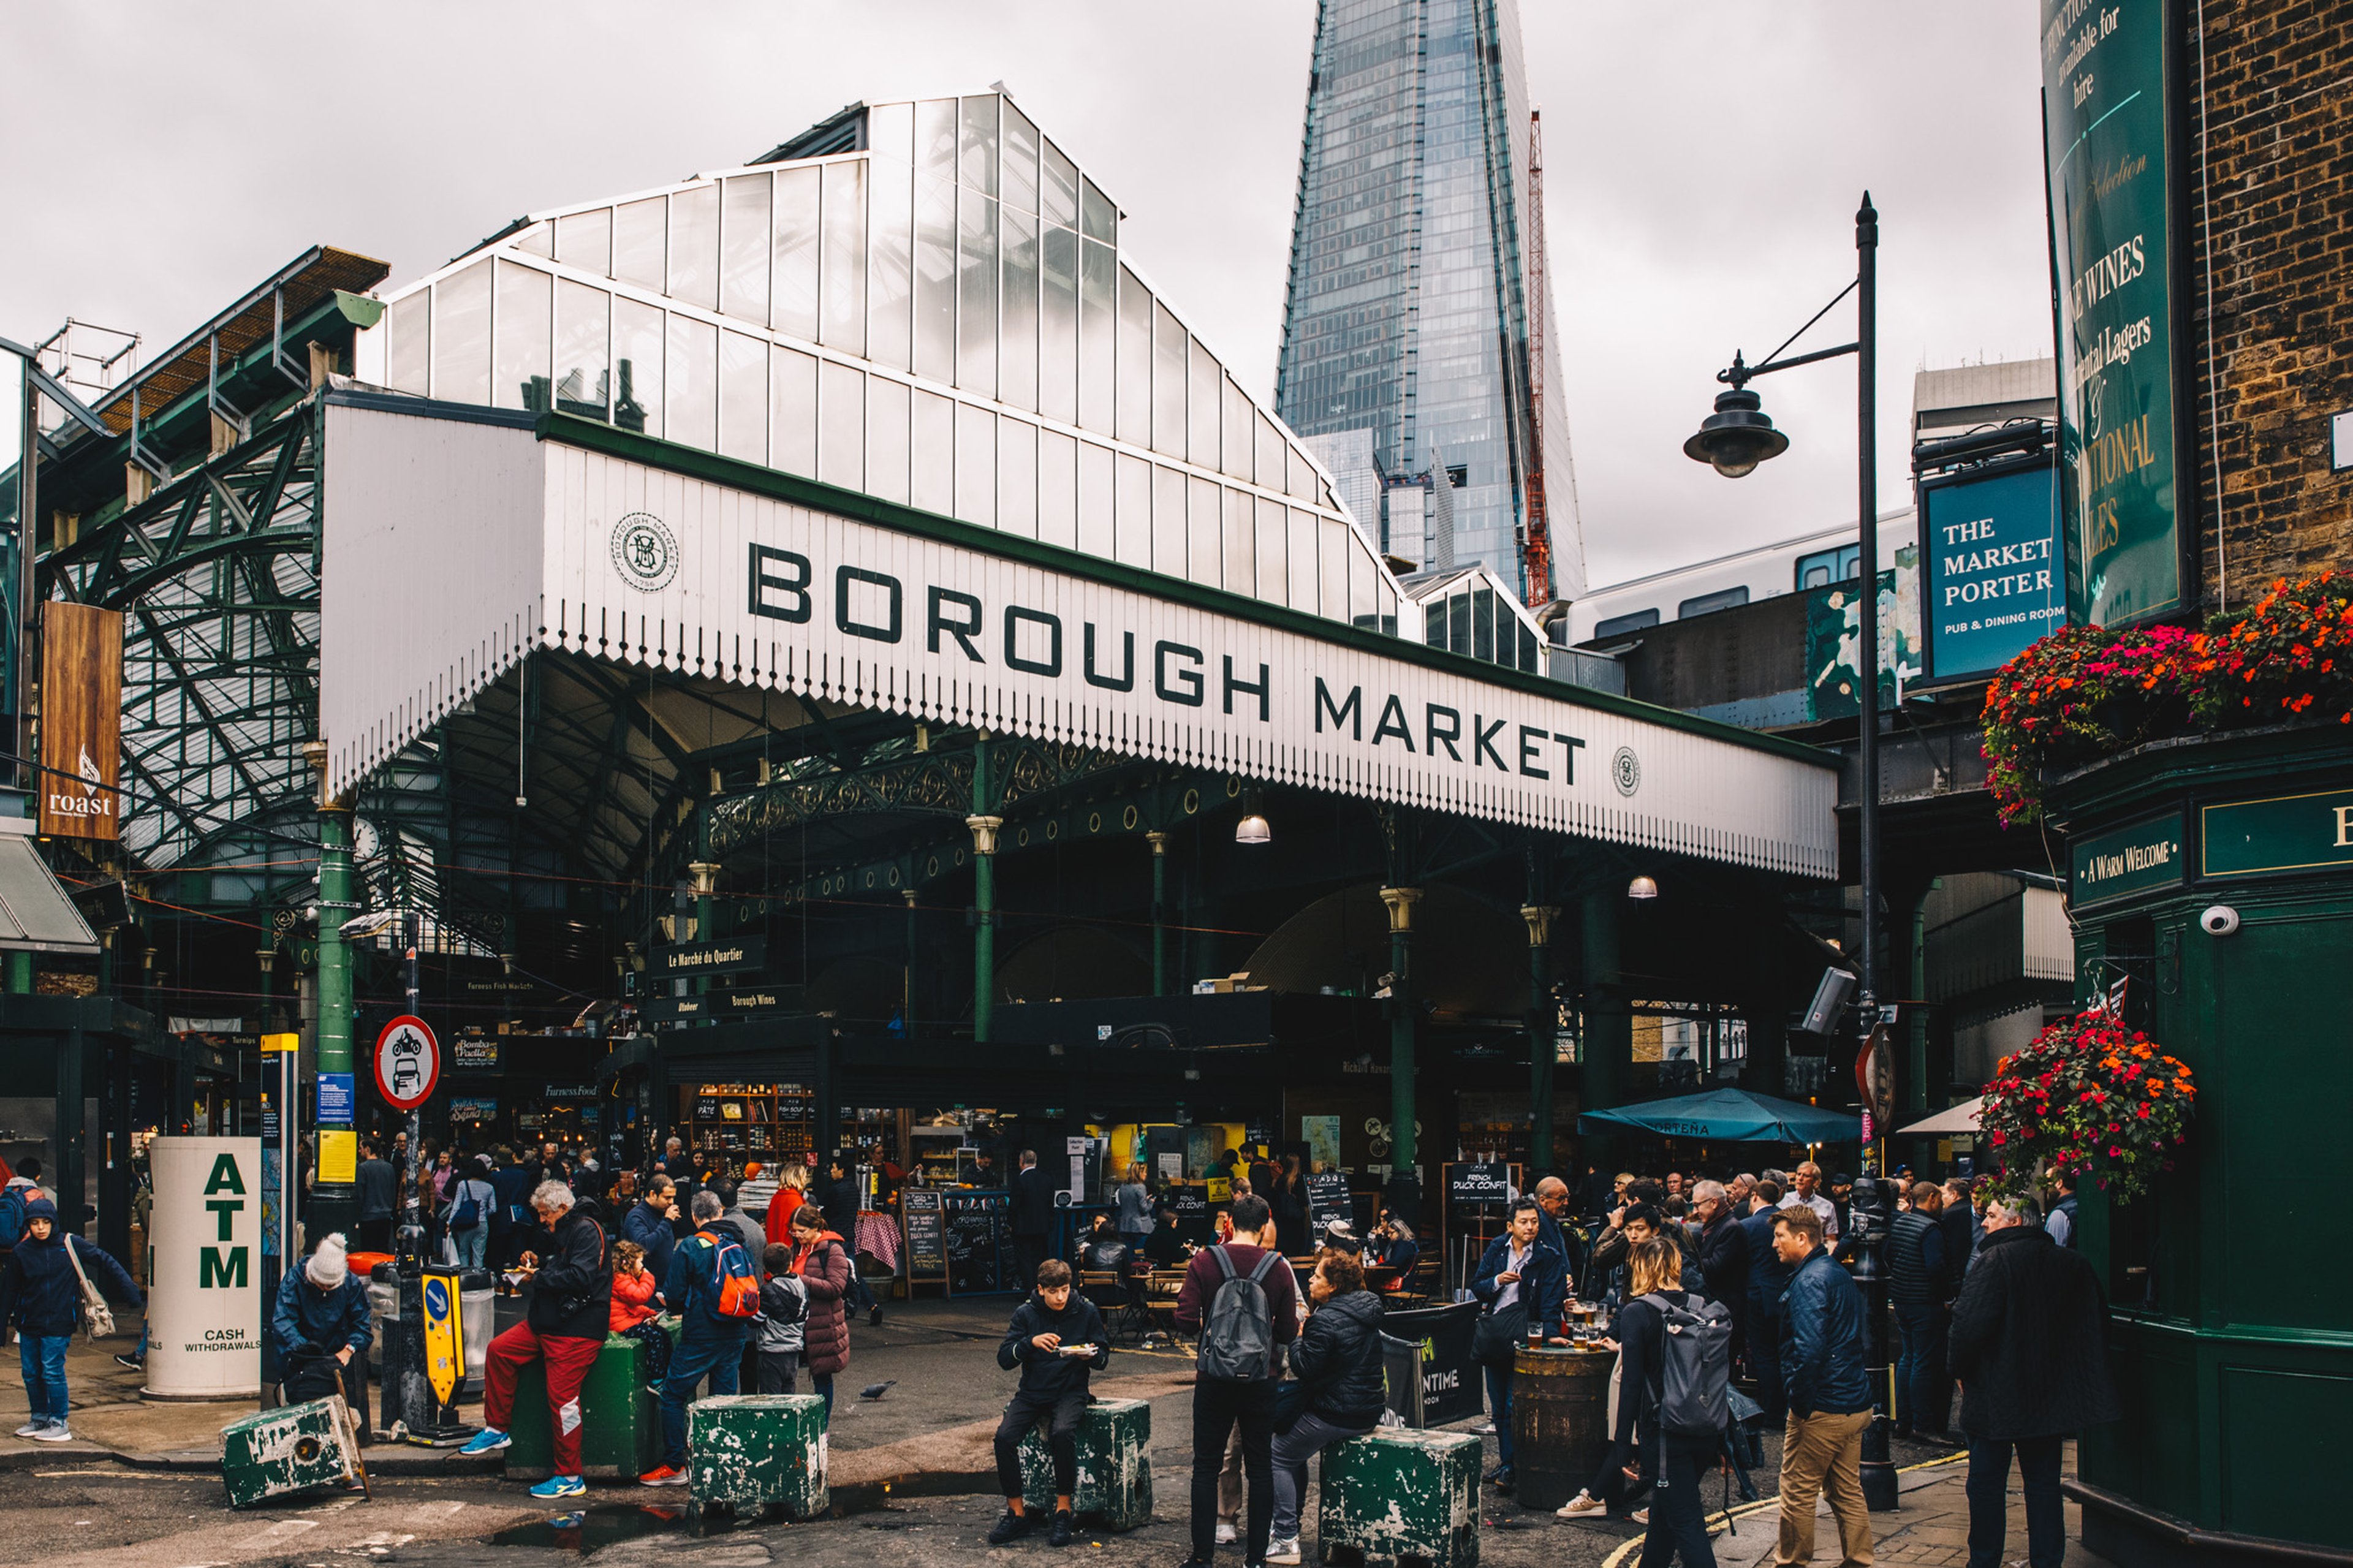 How to Eat Your Way Through London’s Borough Market—Watch Now!